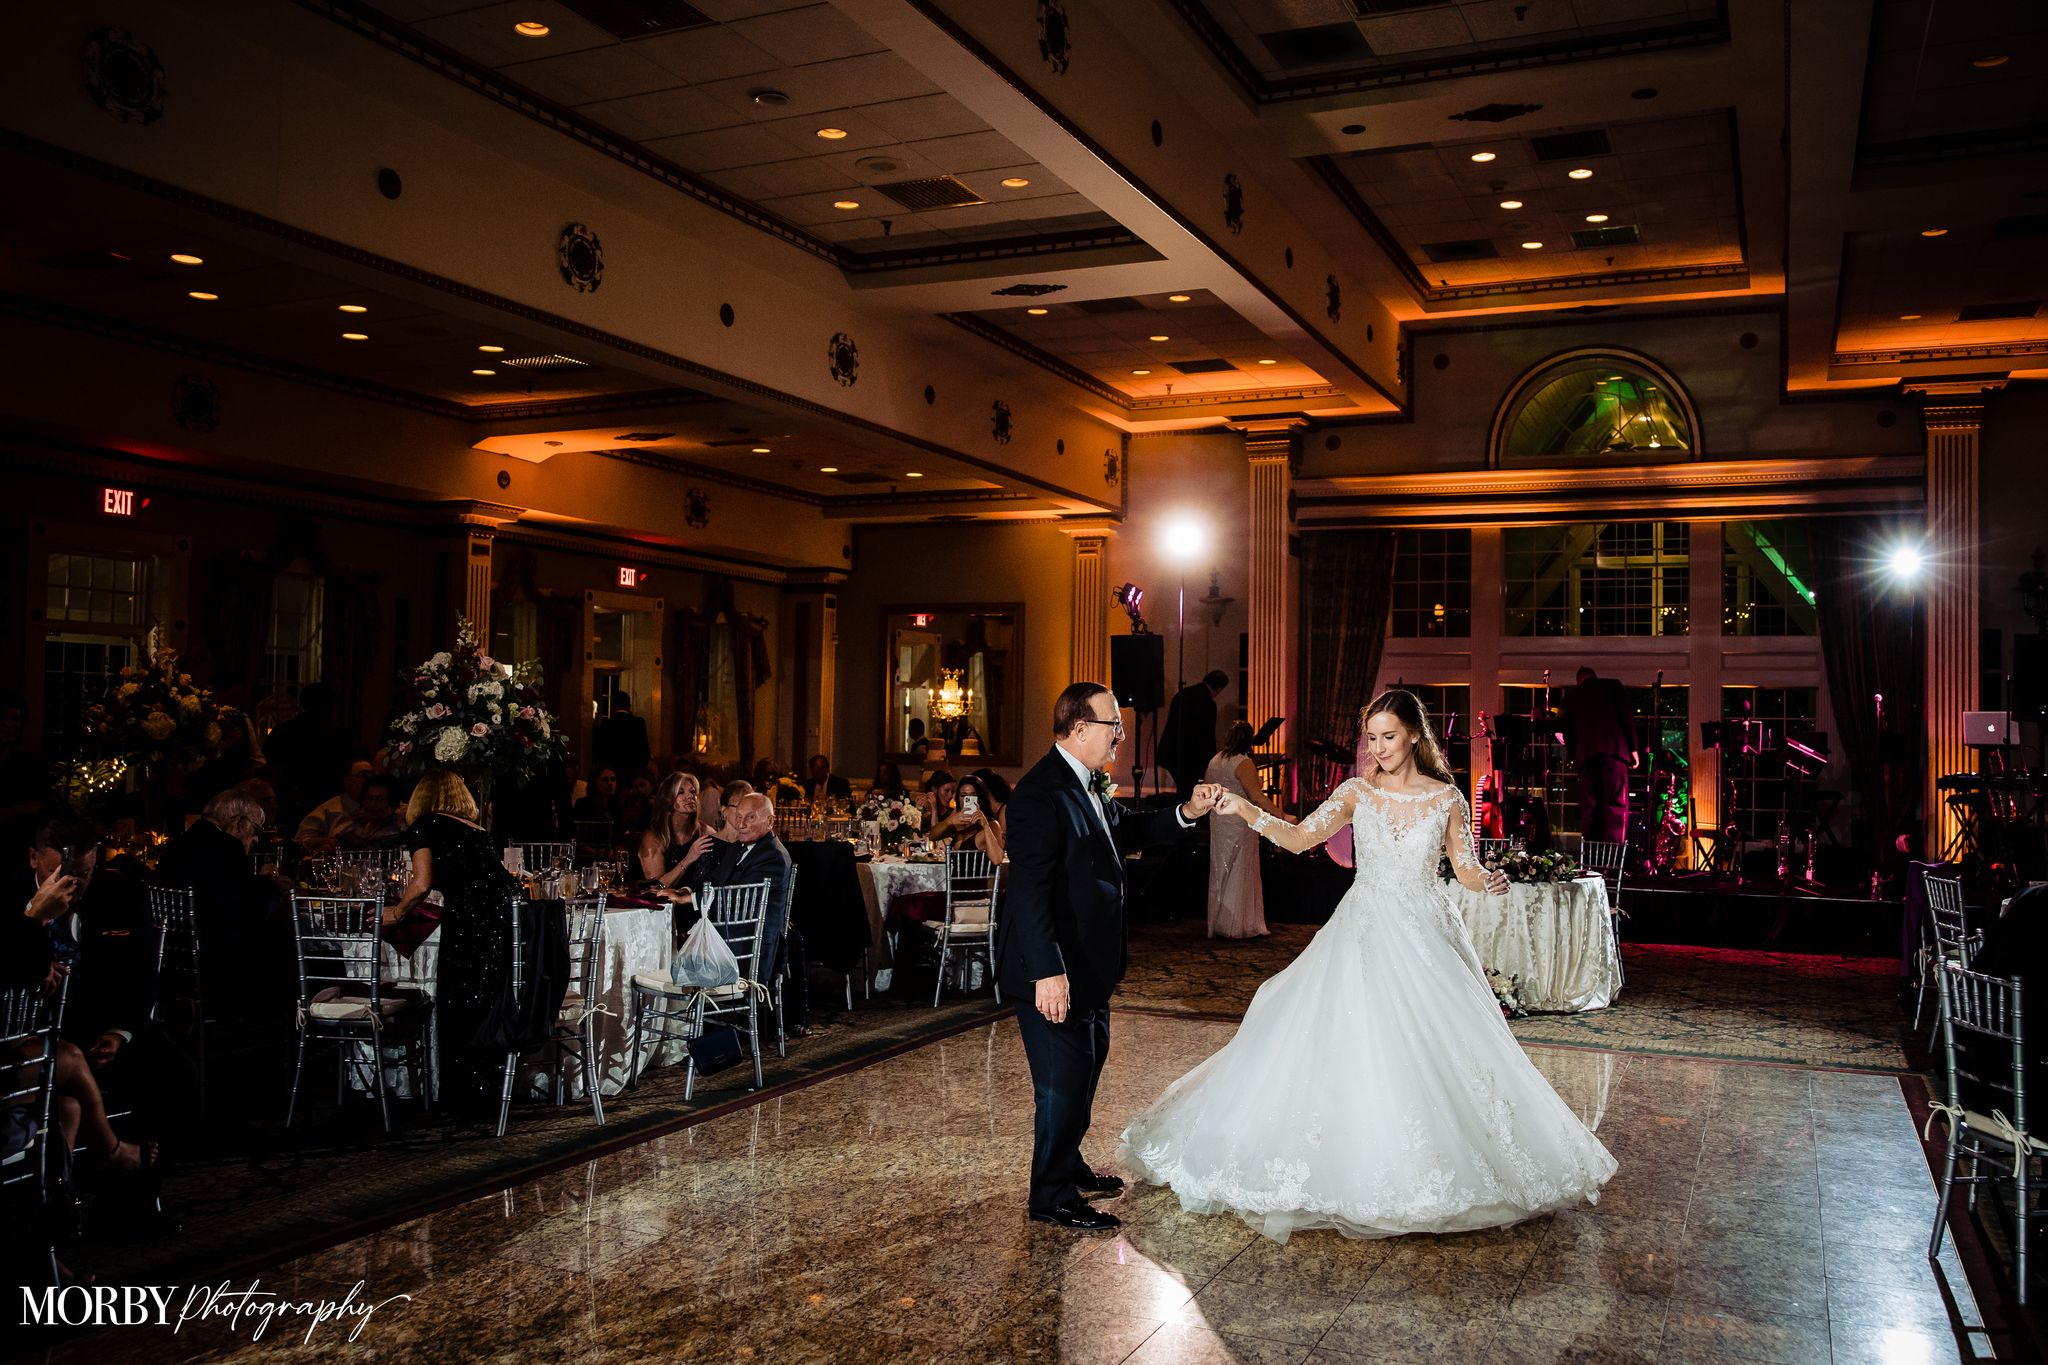 A Bride's Dance with Her Dad